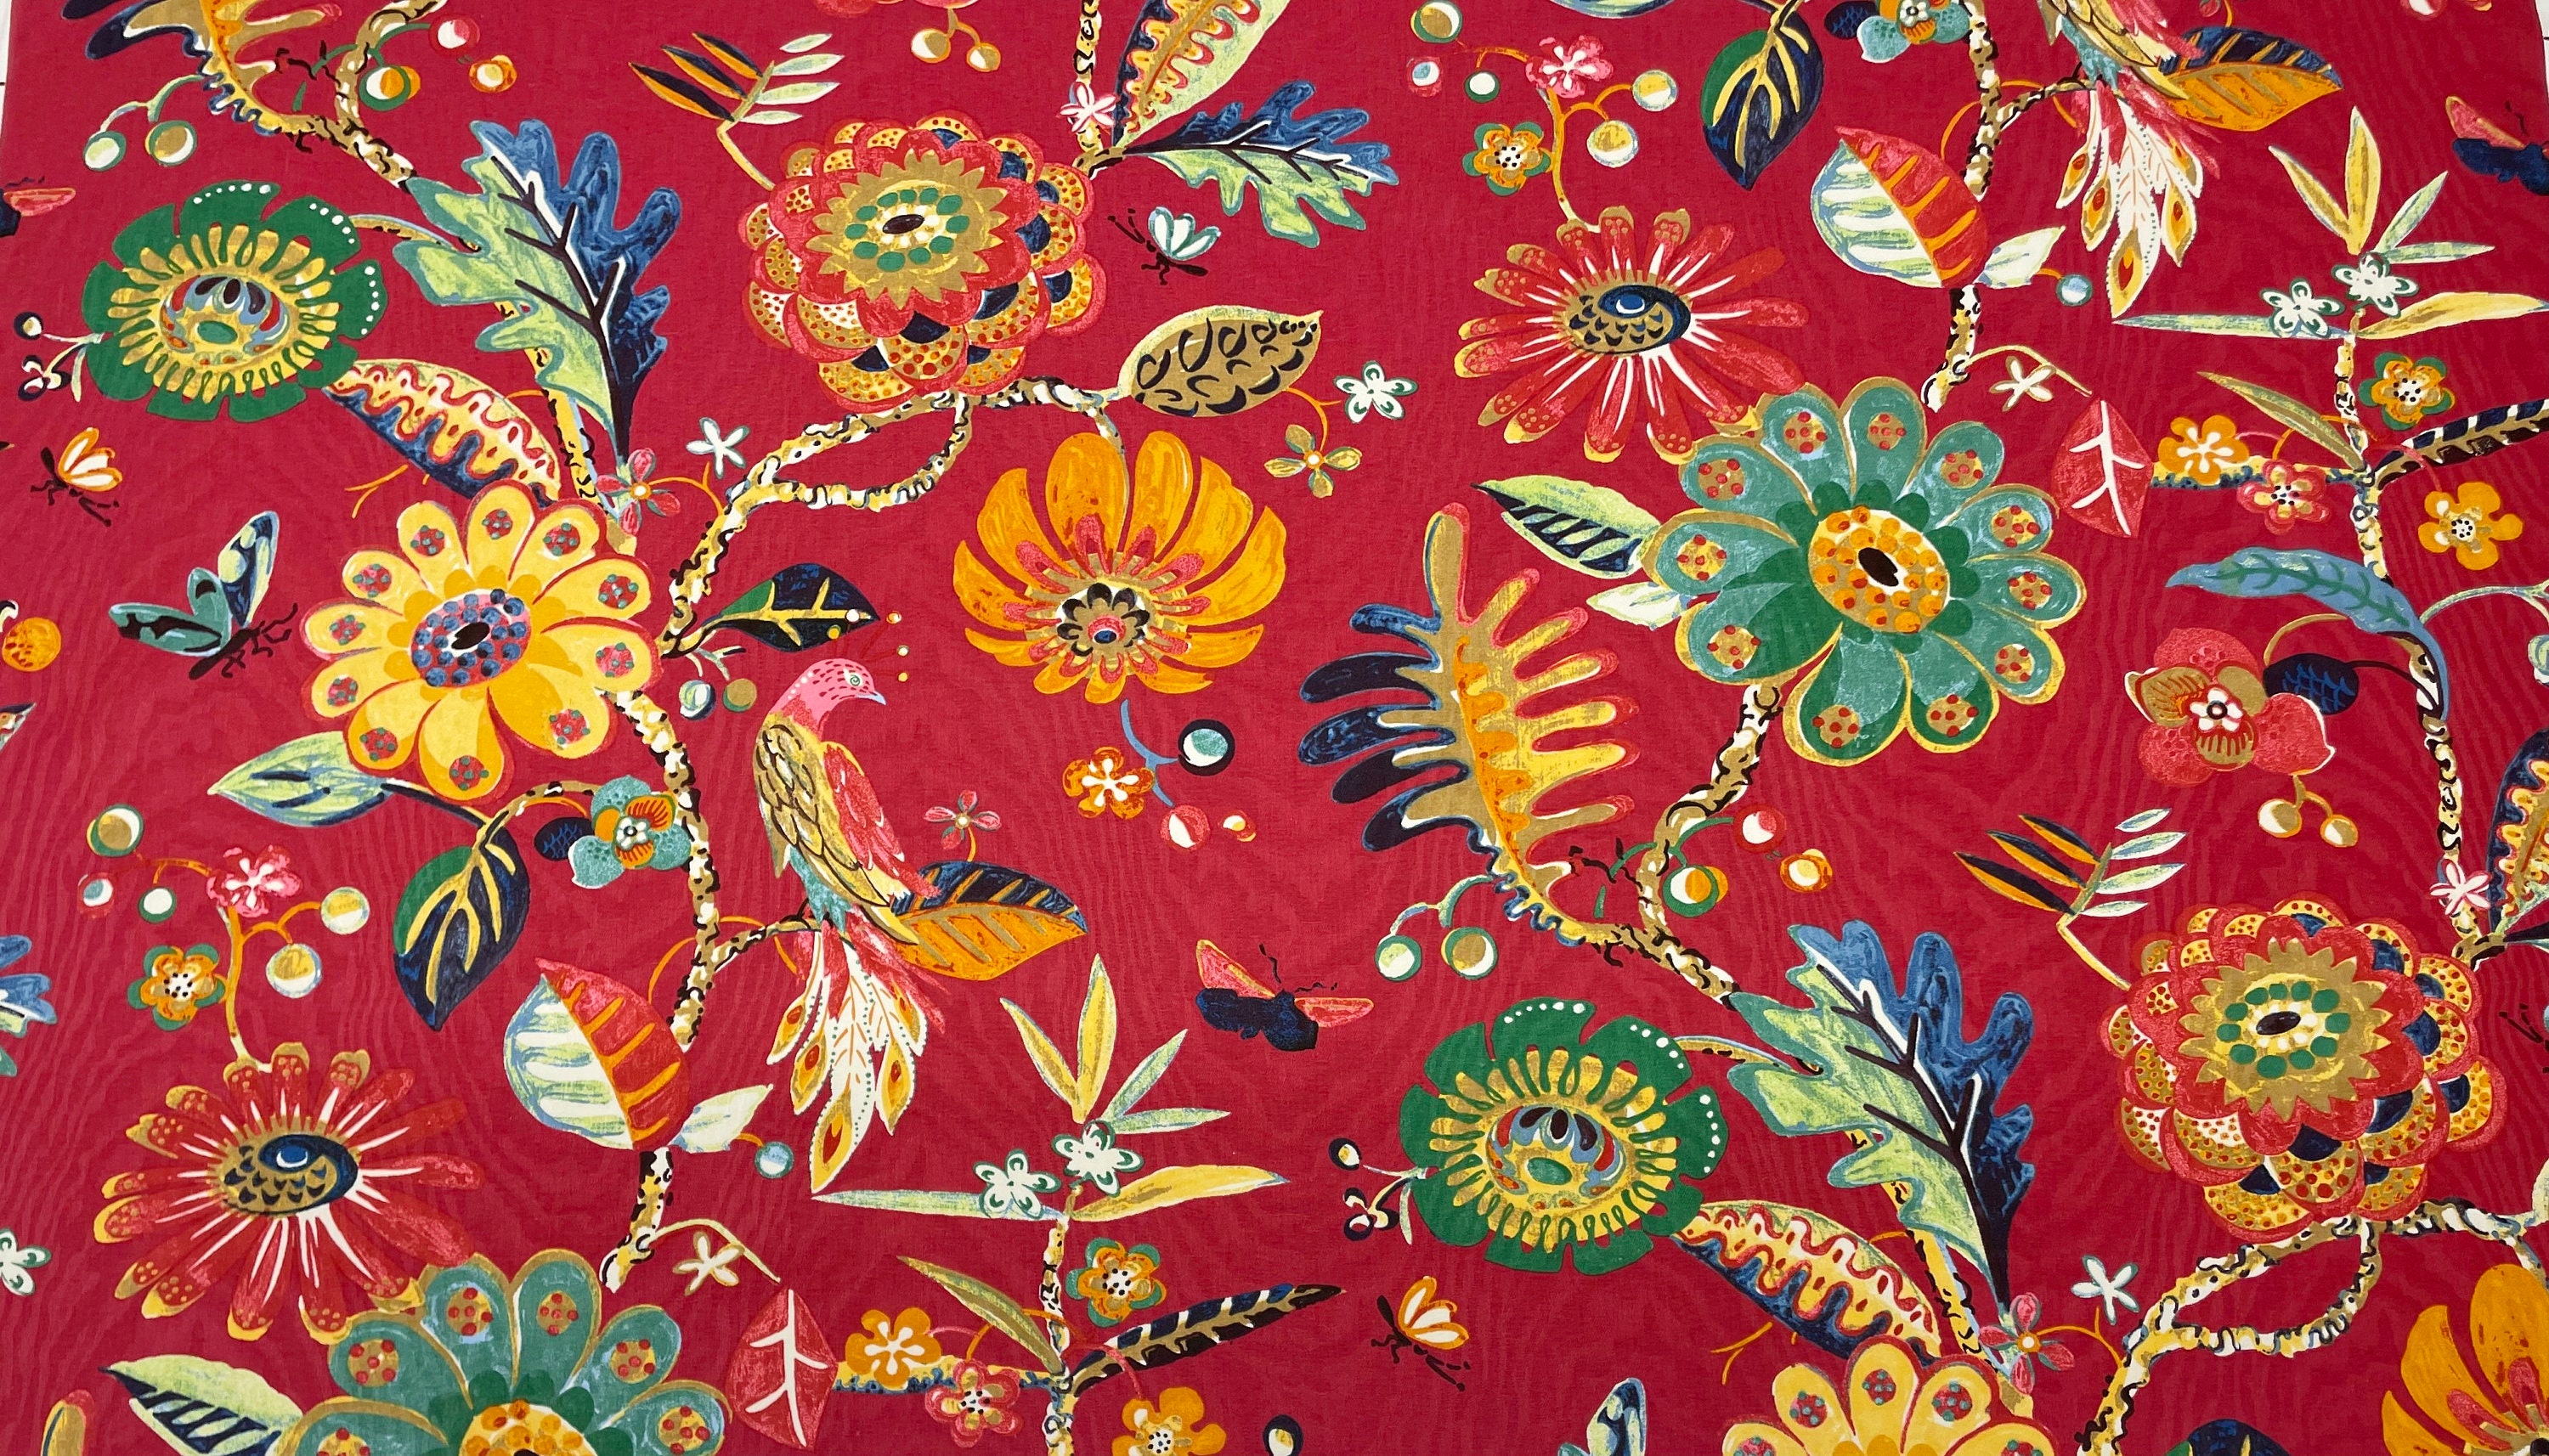 Feelyou Poppy Flowers Upholstery Fabric by The Yard, Red Floral Botanical  Reupholstery Fabric for Chairs, Rustic Garden Theme Decorative Fabric for